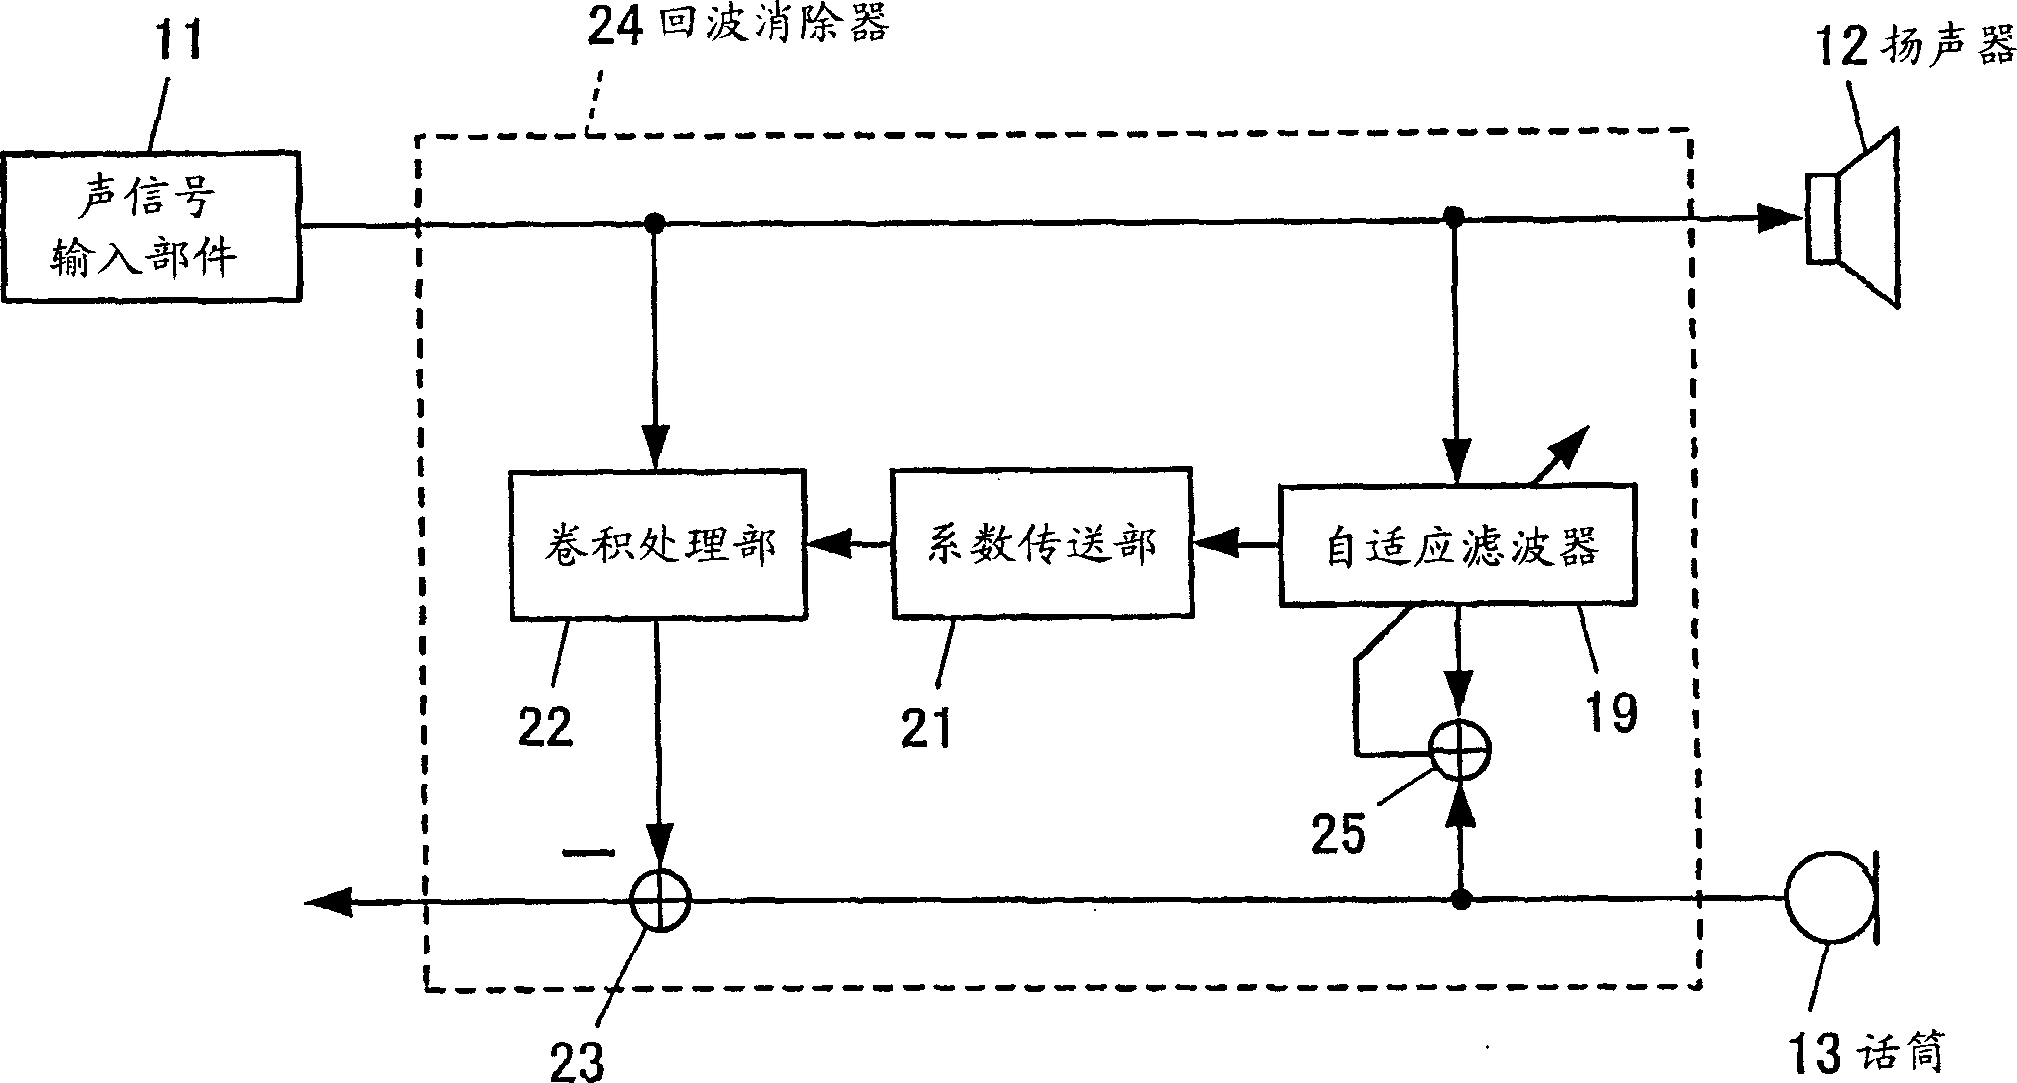 Acoustic processing system, acoustic processing device, acoustic processing method, acoustic processing program, and storage medium